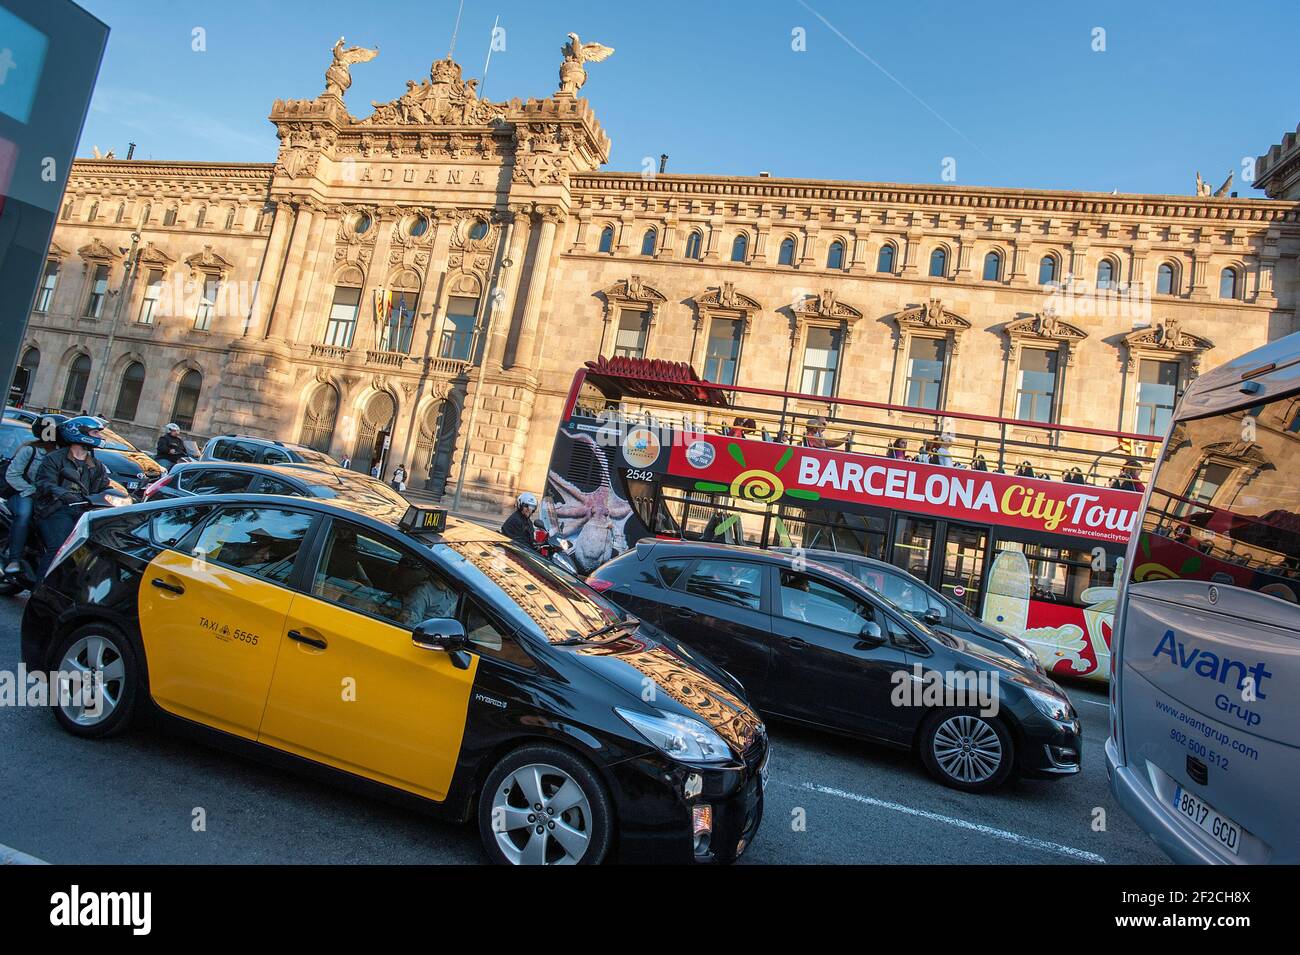 Port Customs building with taxi and City tour open top bus, Barcelona, Catalonia, Spain Stock Photo